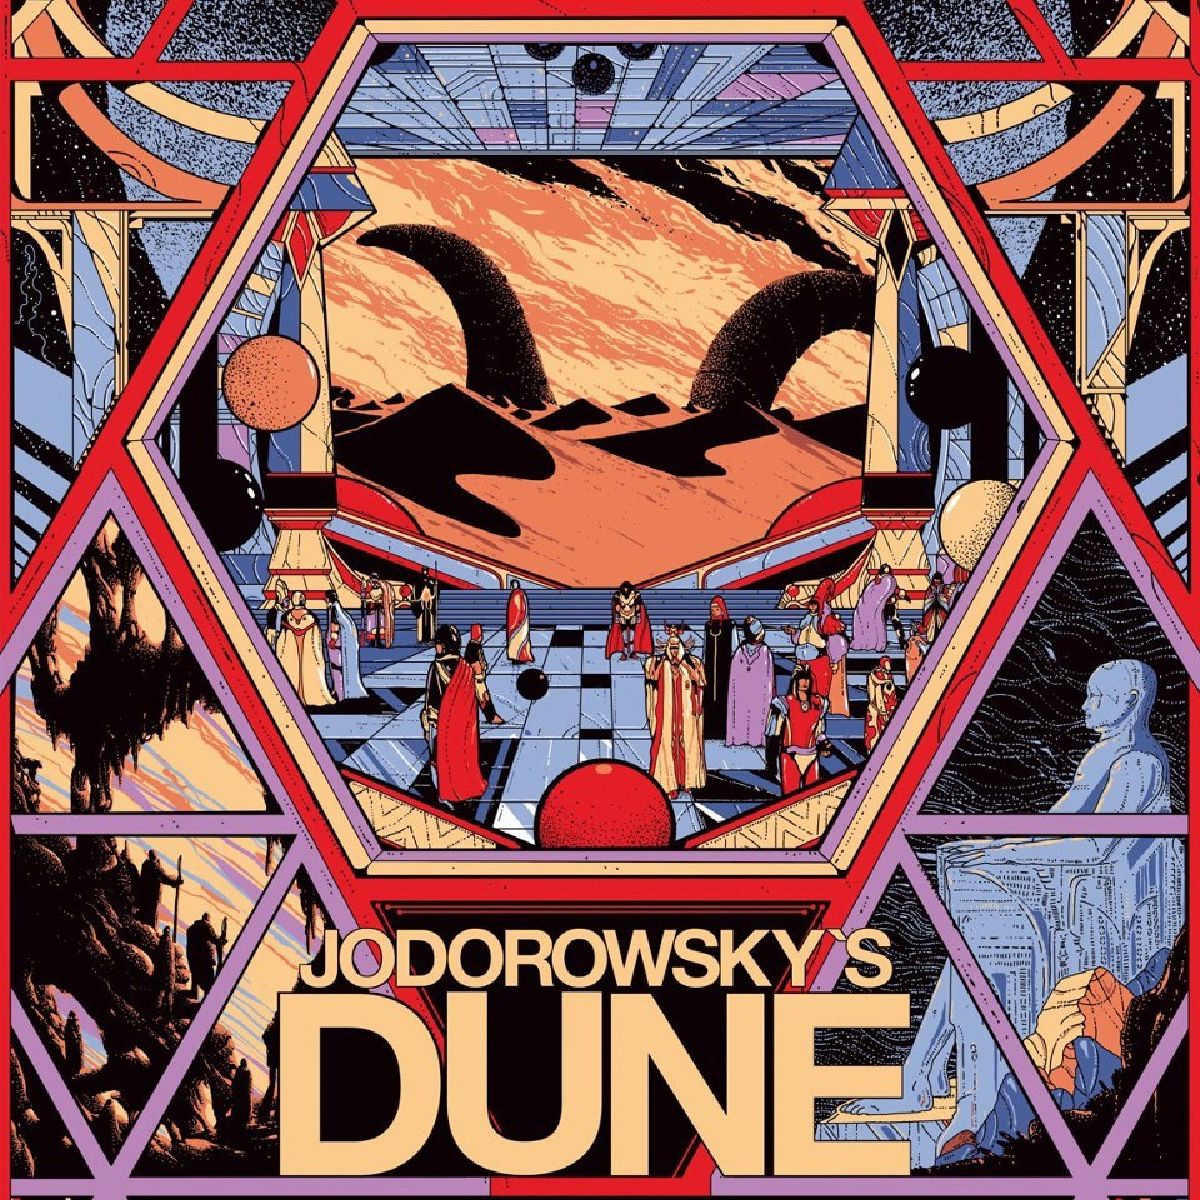 Promotional poster for Jodorowsky's 'Dune.'